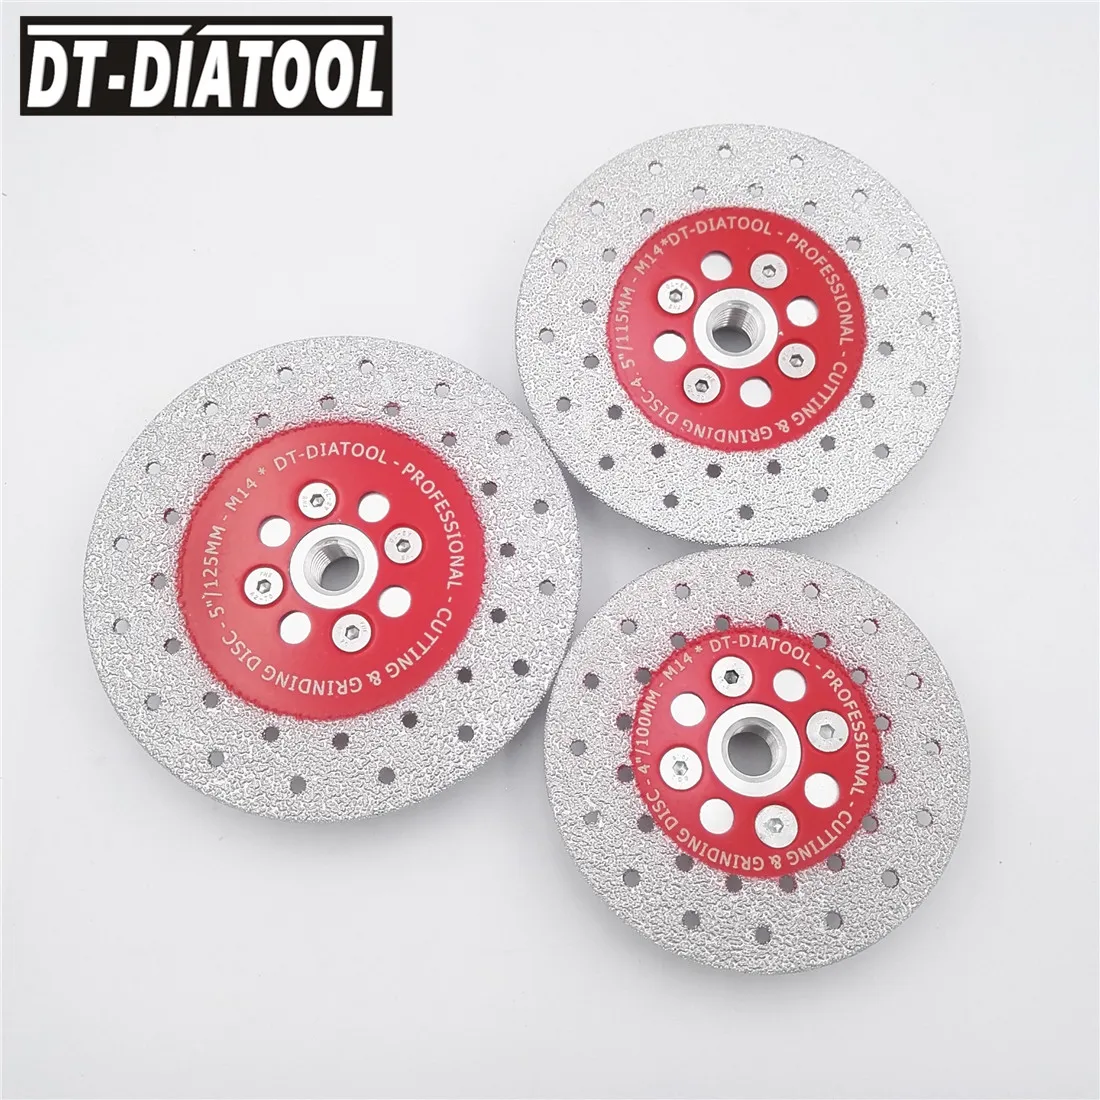 

DT-DIATOOL 1pc Dia 100/115/125mm Double Side Coated Diamond Cutting Disc Grinding Wheel for Marble Granite Angle Grinder M14